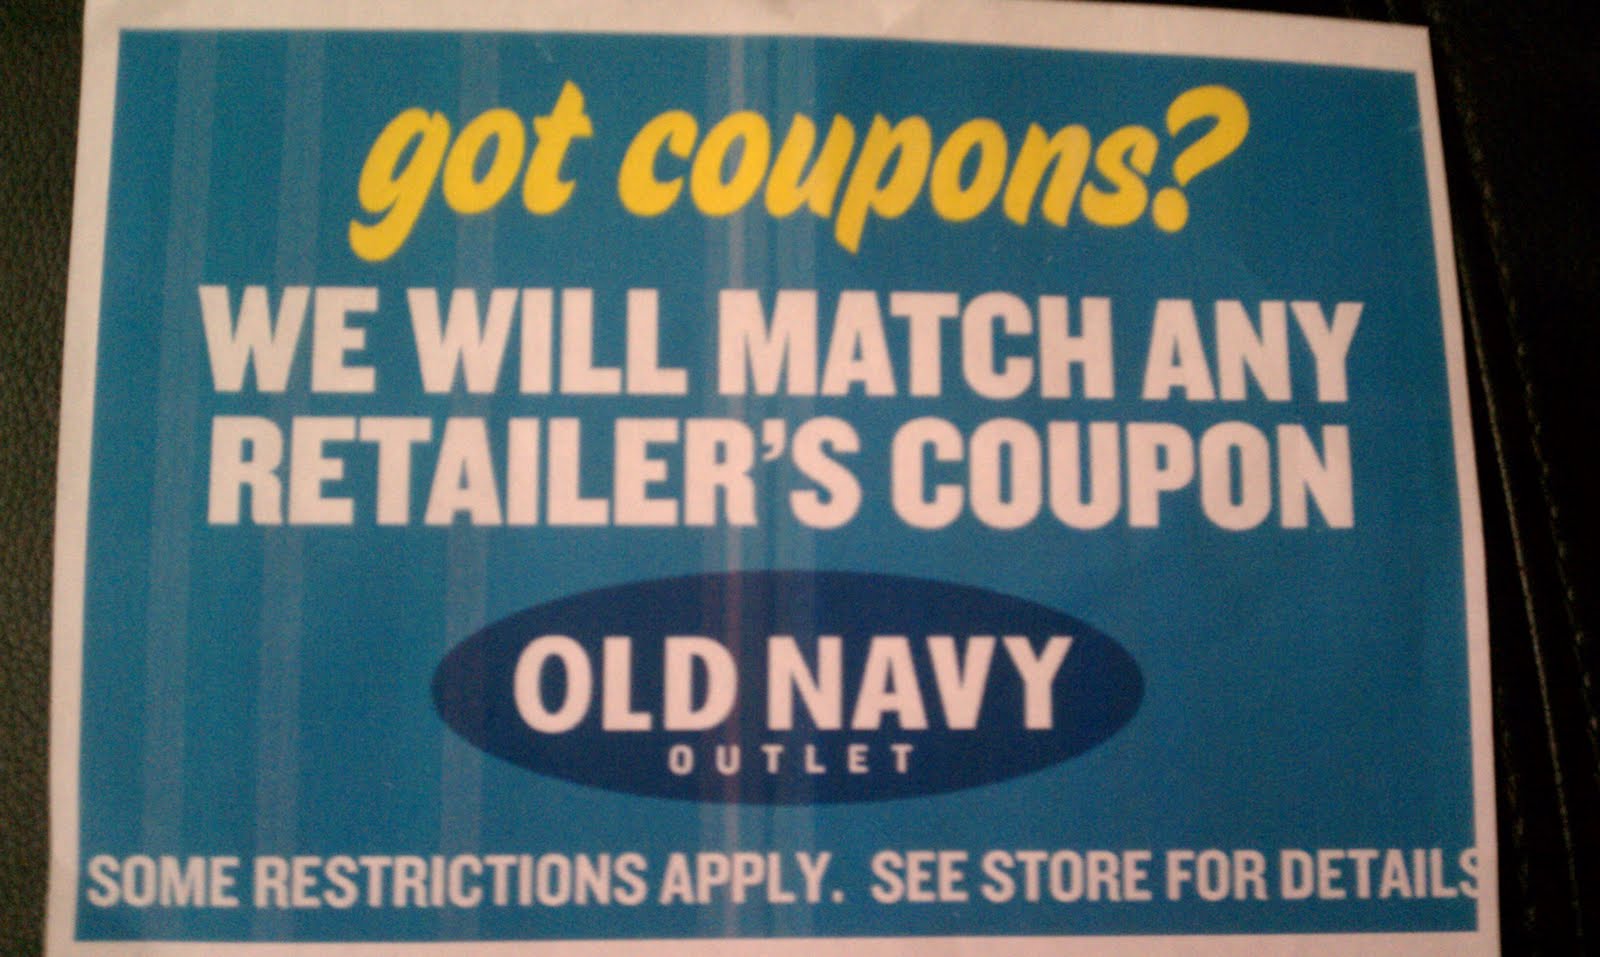 ... old navy at shopping malls in michigan store locations old navy at